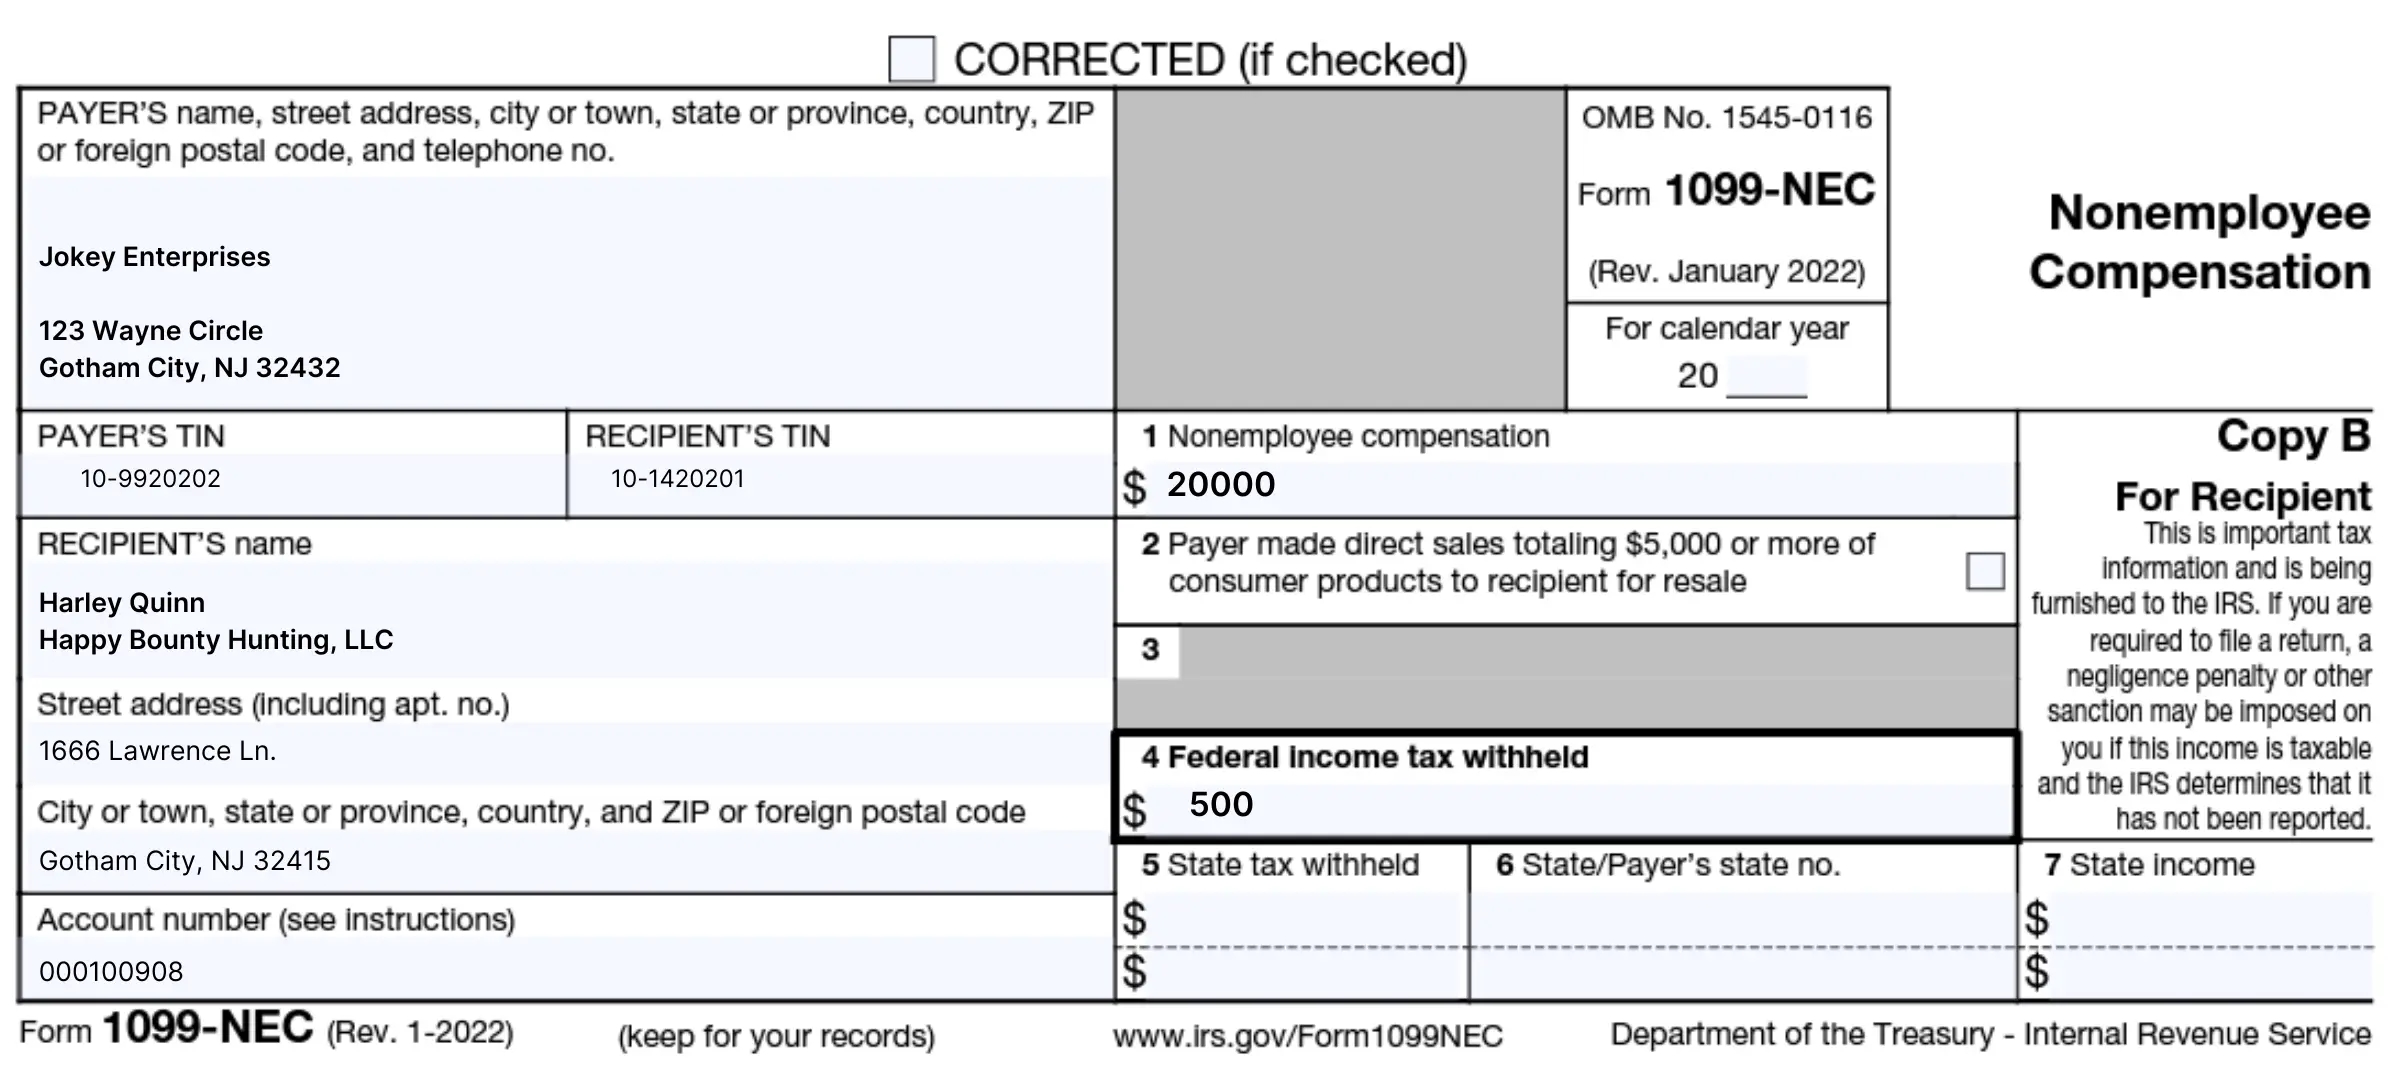 Image of a Form 1099-NEC with details of nonemployee compensation, federal and state taxes withheld, and recipient's information for tax purposes.